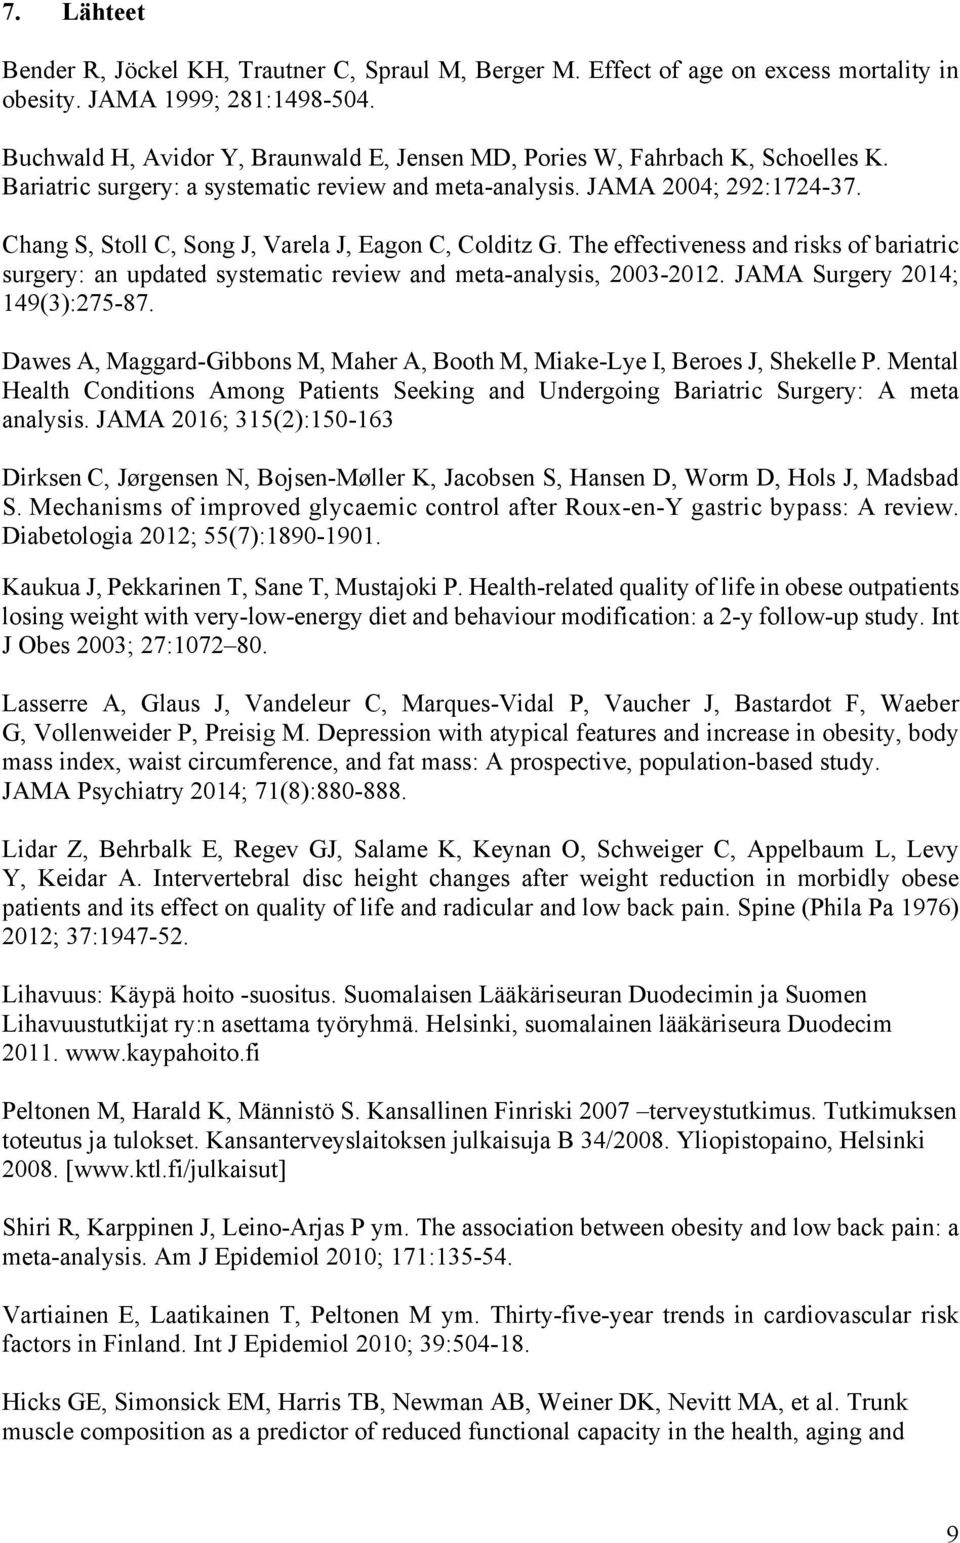 Chang S, Stoll C, Song J, Varela J, Eagon C, Colditz G. The effectiveness and risks of bariatric surgery: an updated systematic review and meta-analysis, 2003-2012. JAMA Surgery 2014; 149(3):275-87.